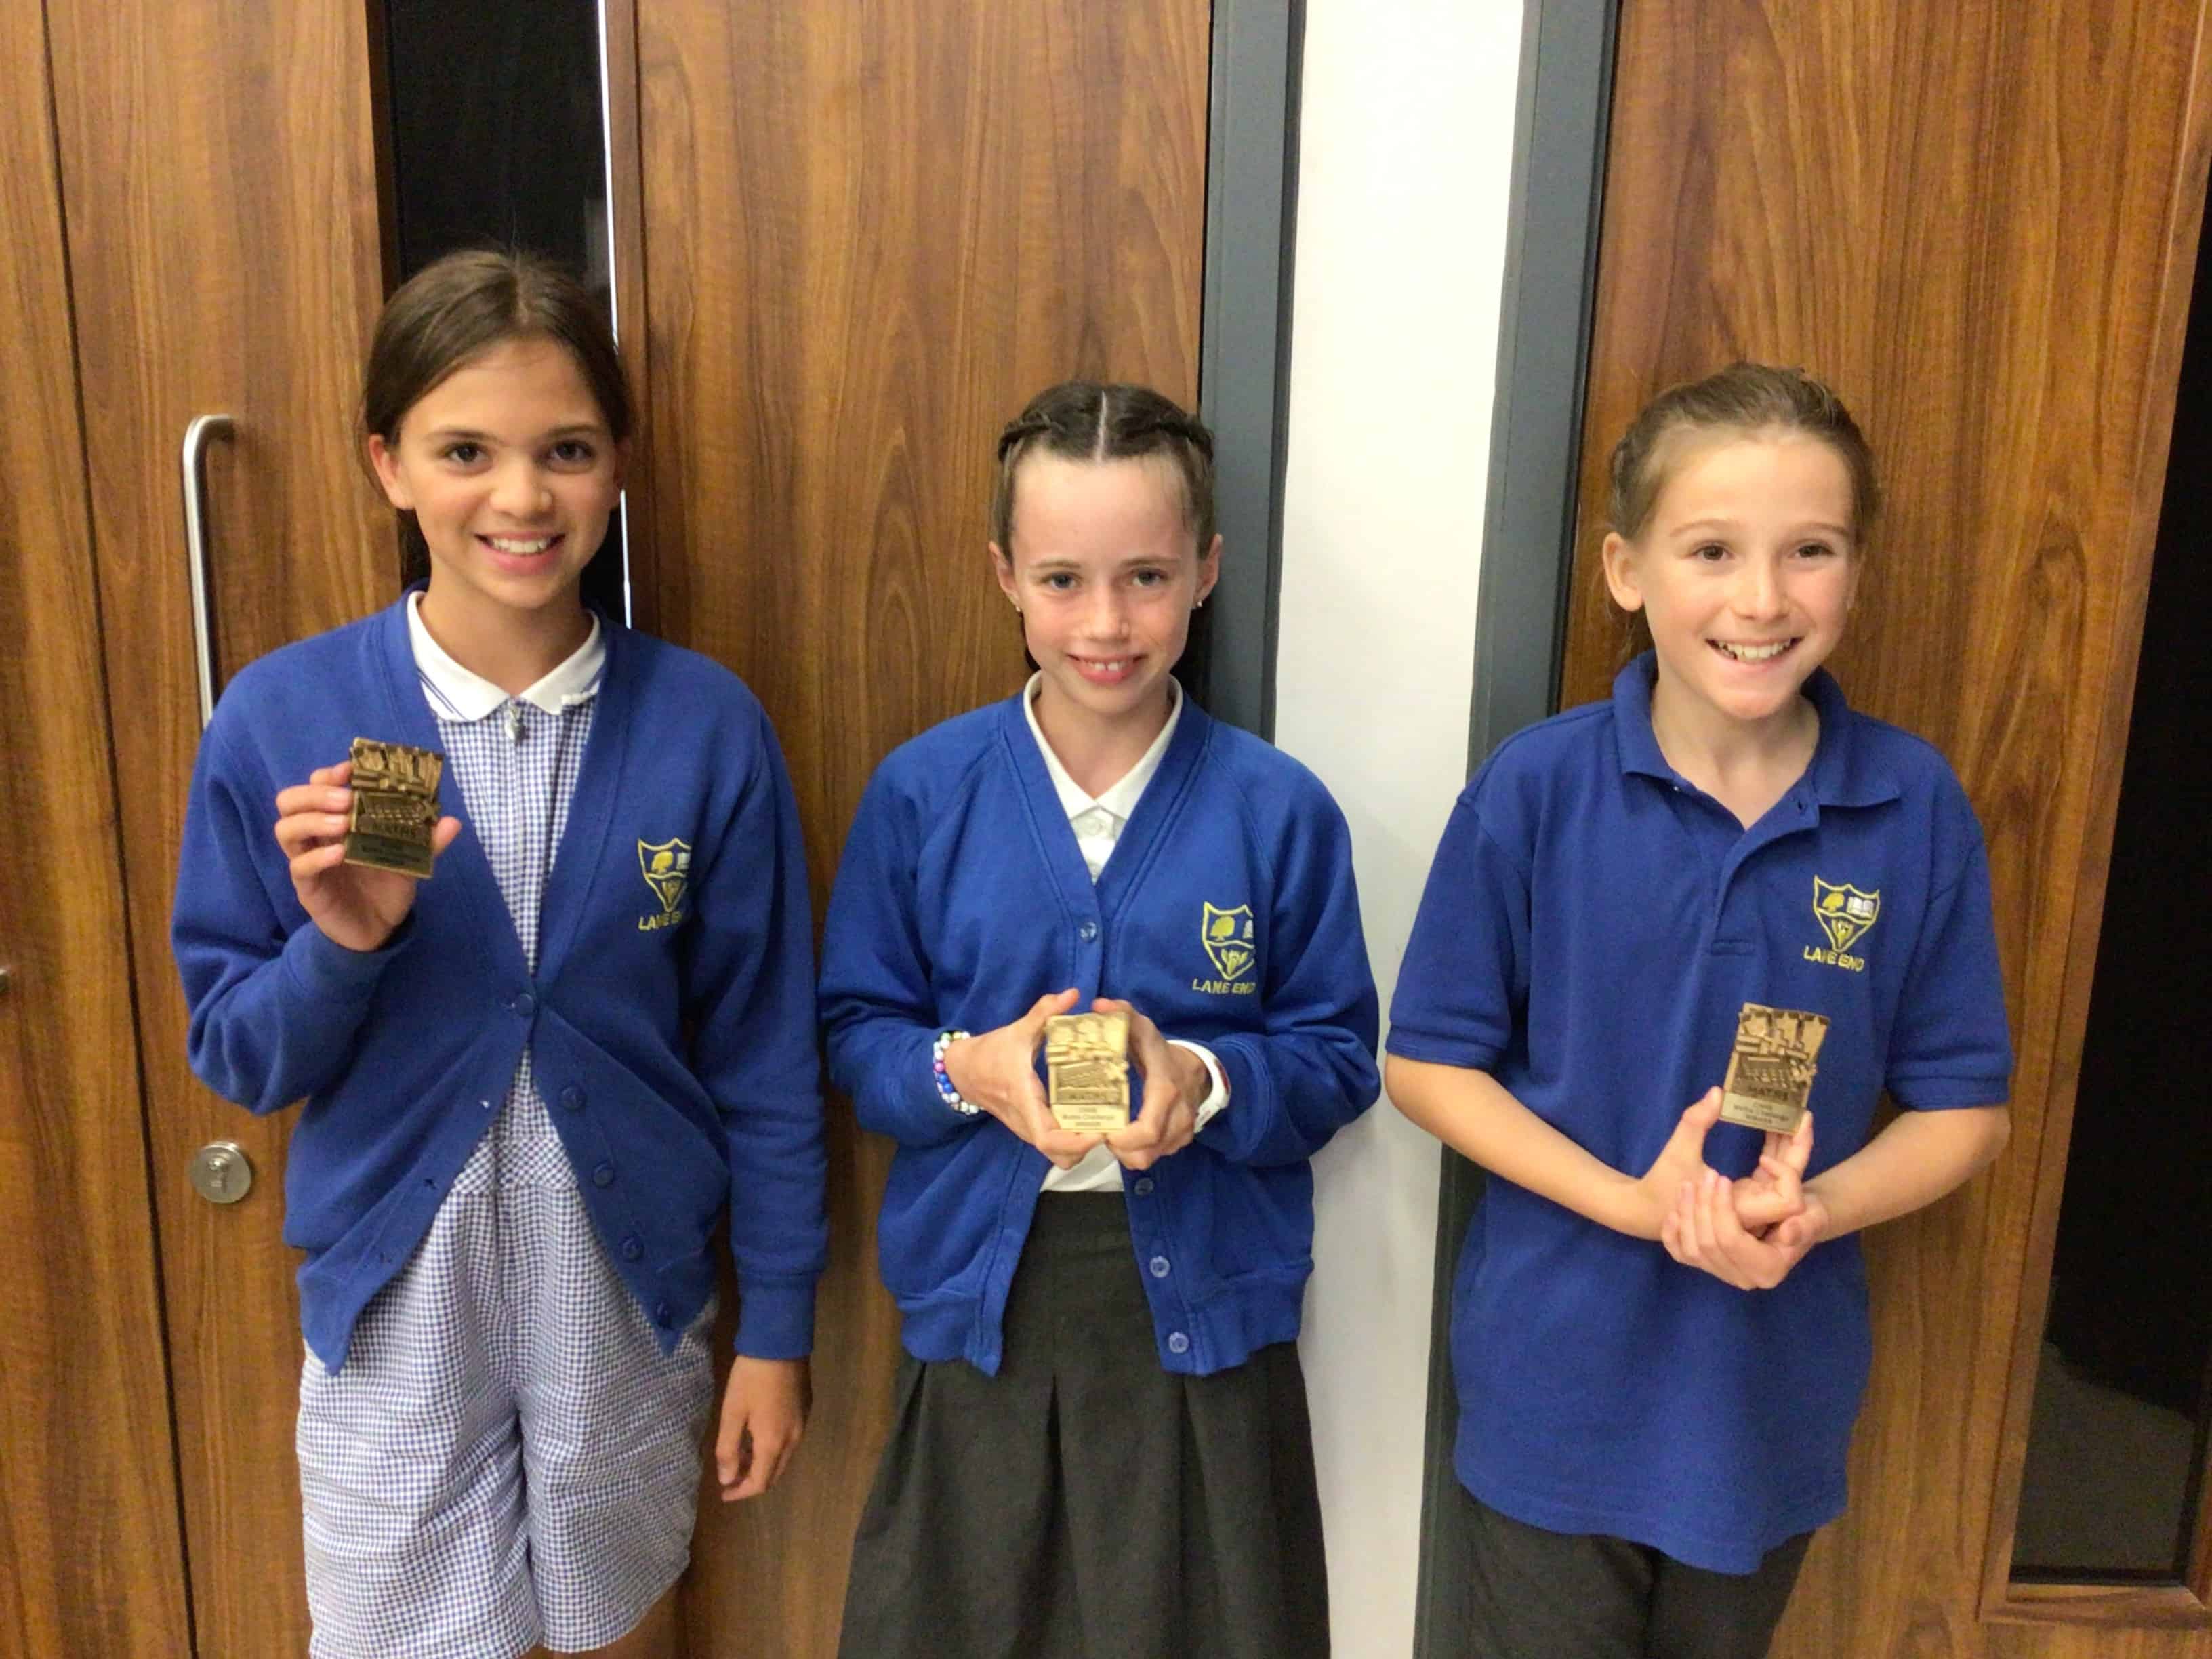 The winning pupils from Lane End Primary School smile with their CHHS Maths Award magnets that they earned at the Cheadle Hulme High School Maths Award Evening.